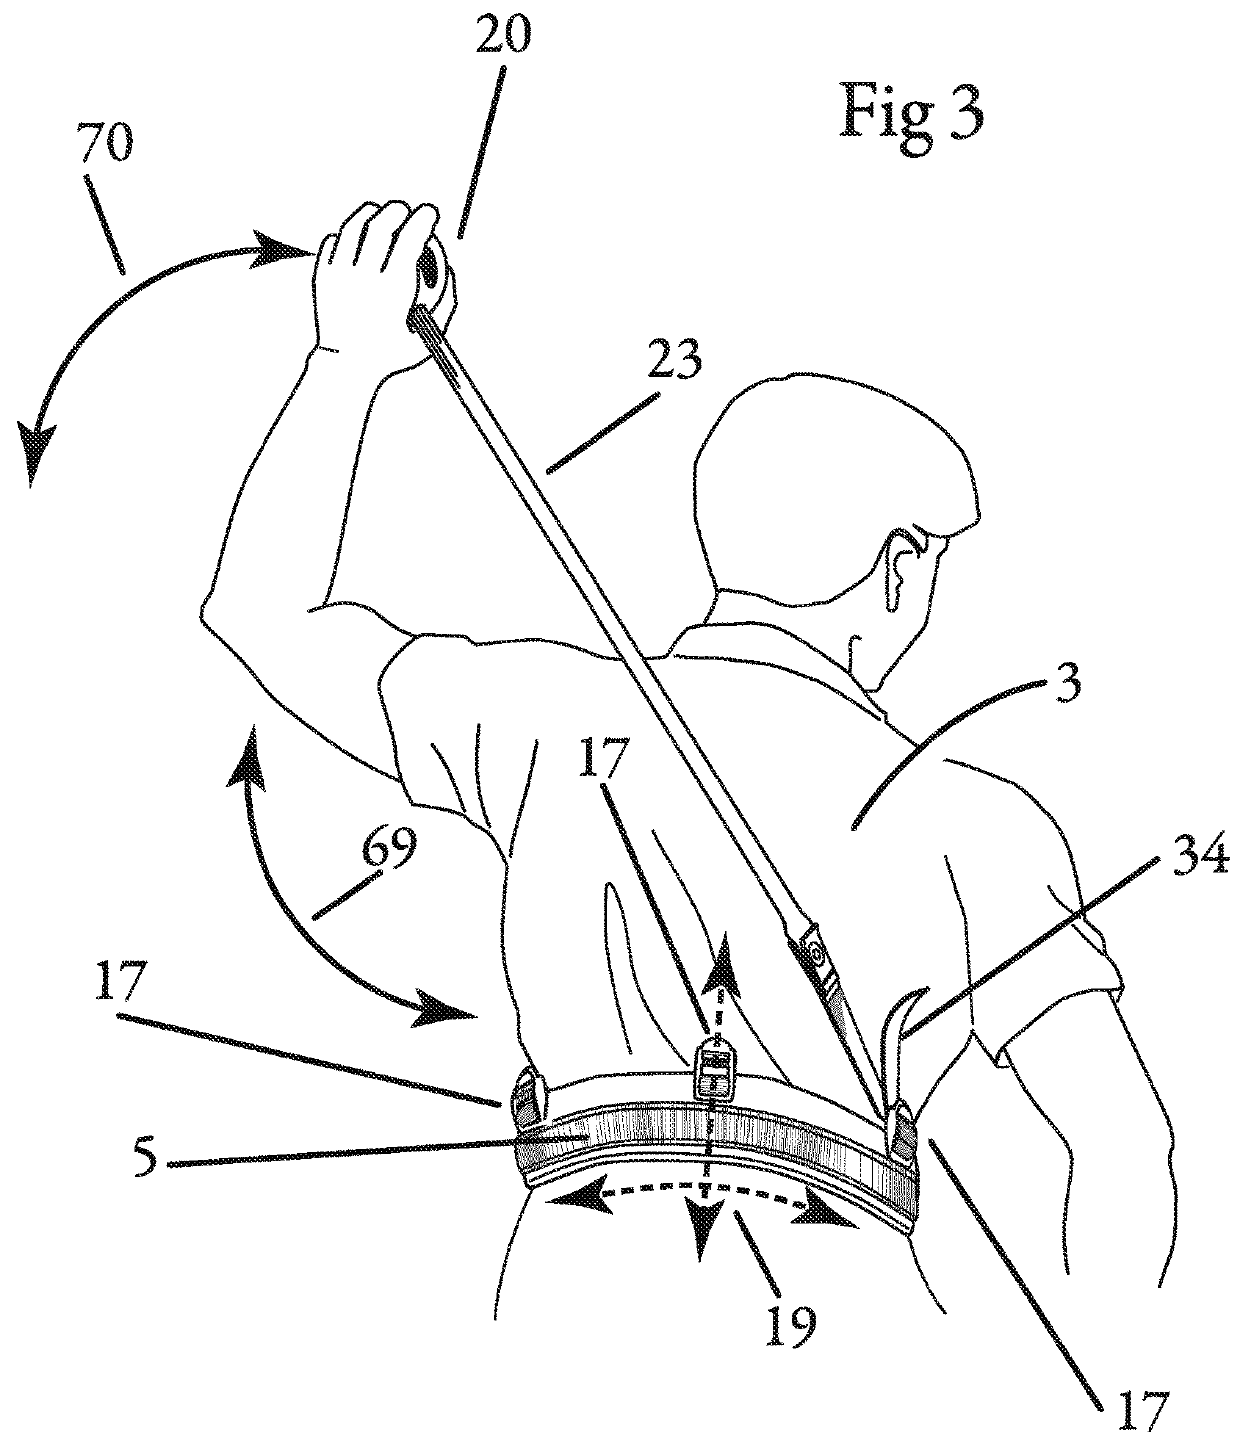 Portable strength training and exercise apparatus